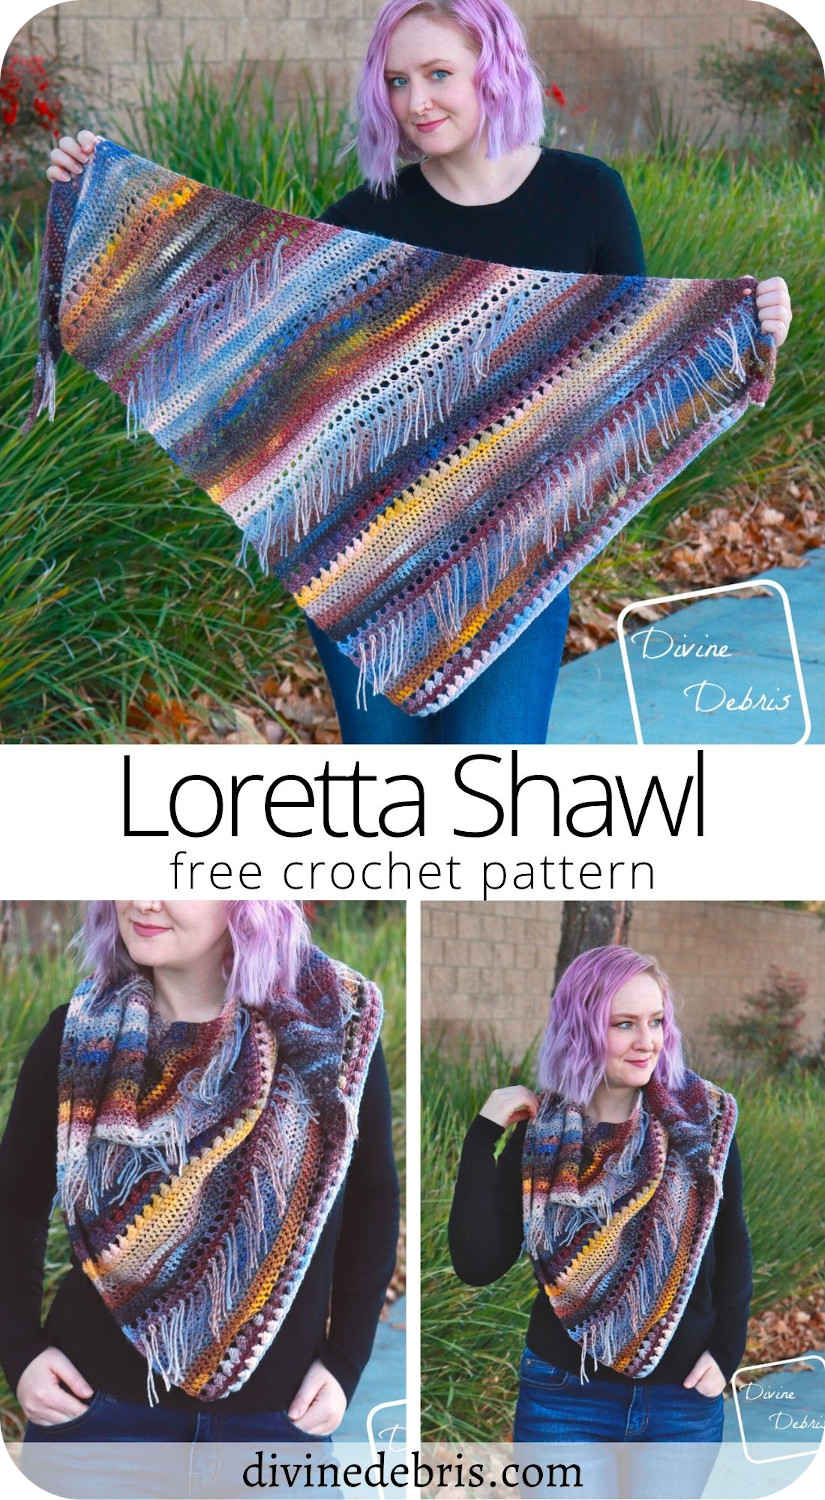 Bring a little big of classy yet modern flair with the Loretta Shawl, a free and easy crochet pattern available from DivineDebris.com.